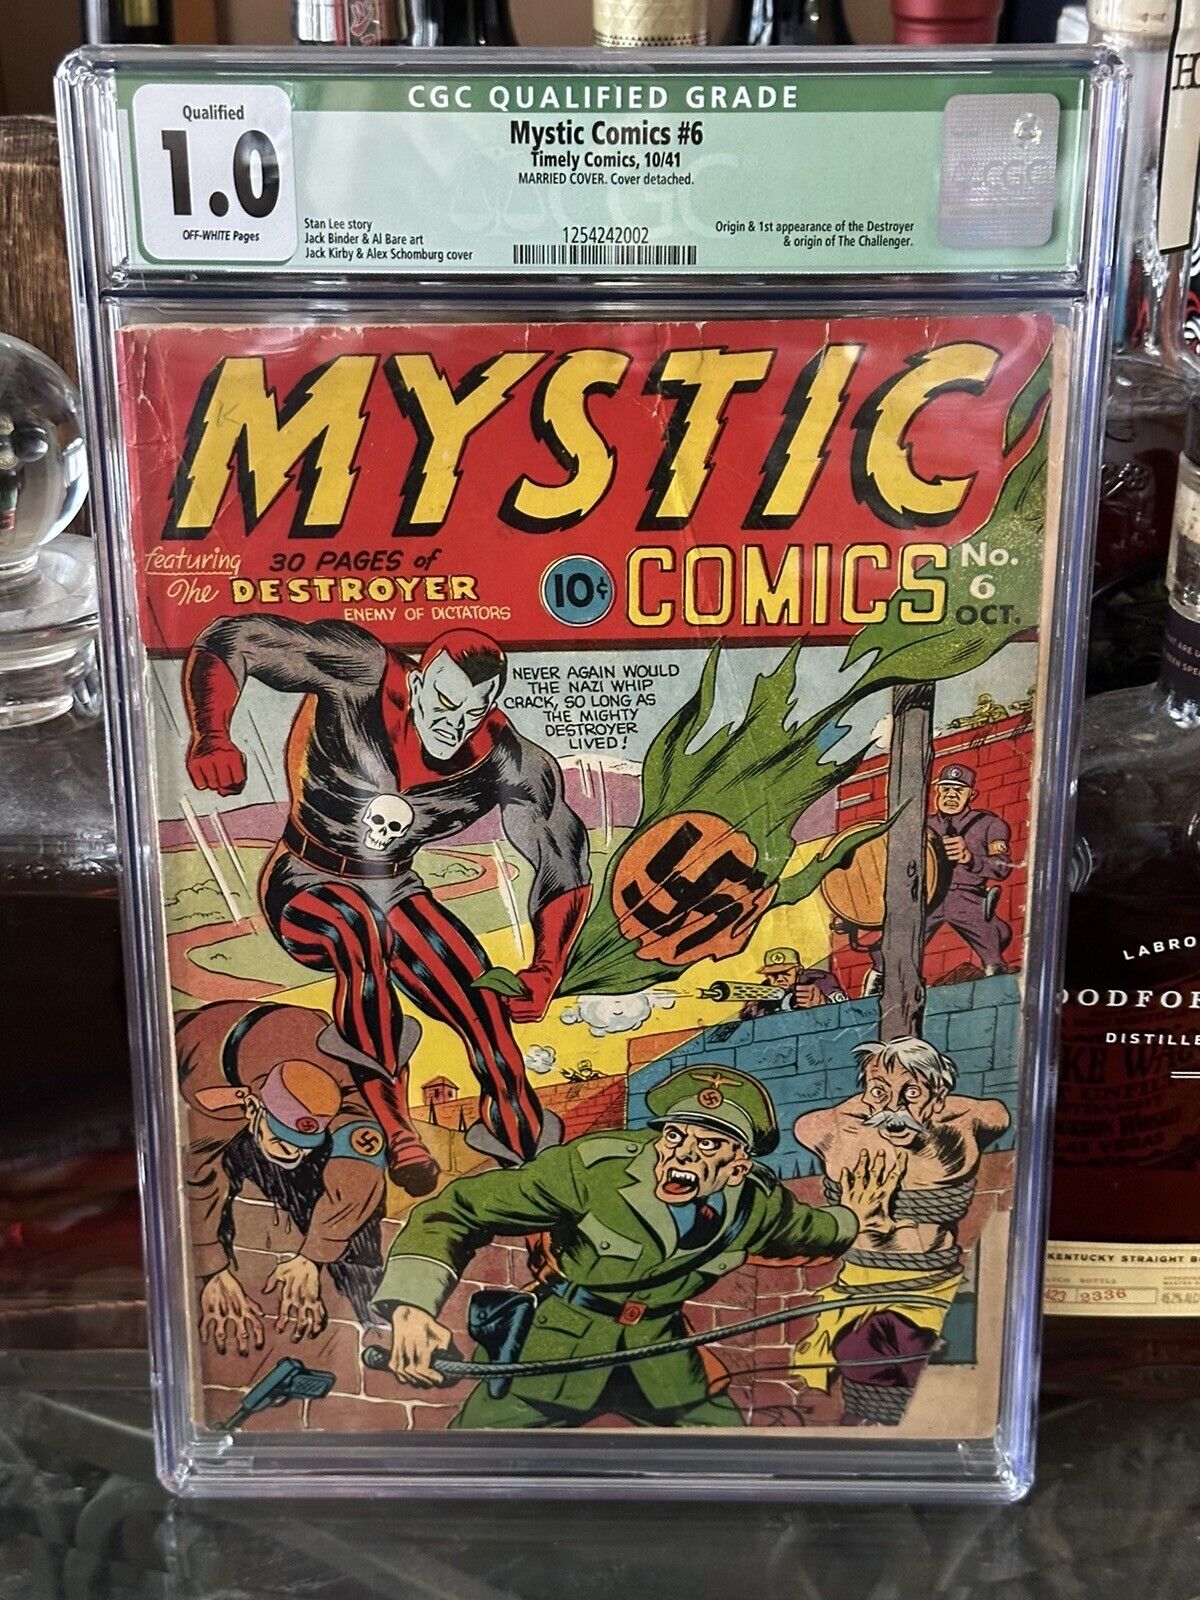 Mystic comics #6 cgc 1.0 qualified.  Golden age. Classic WW2 cover. 1941 Timely